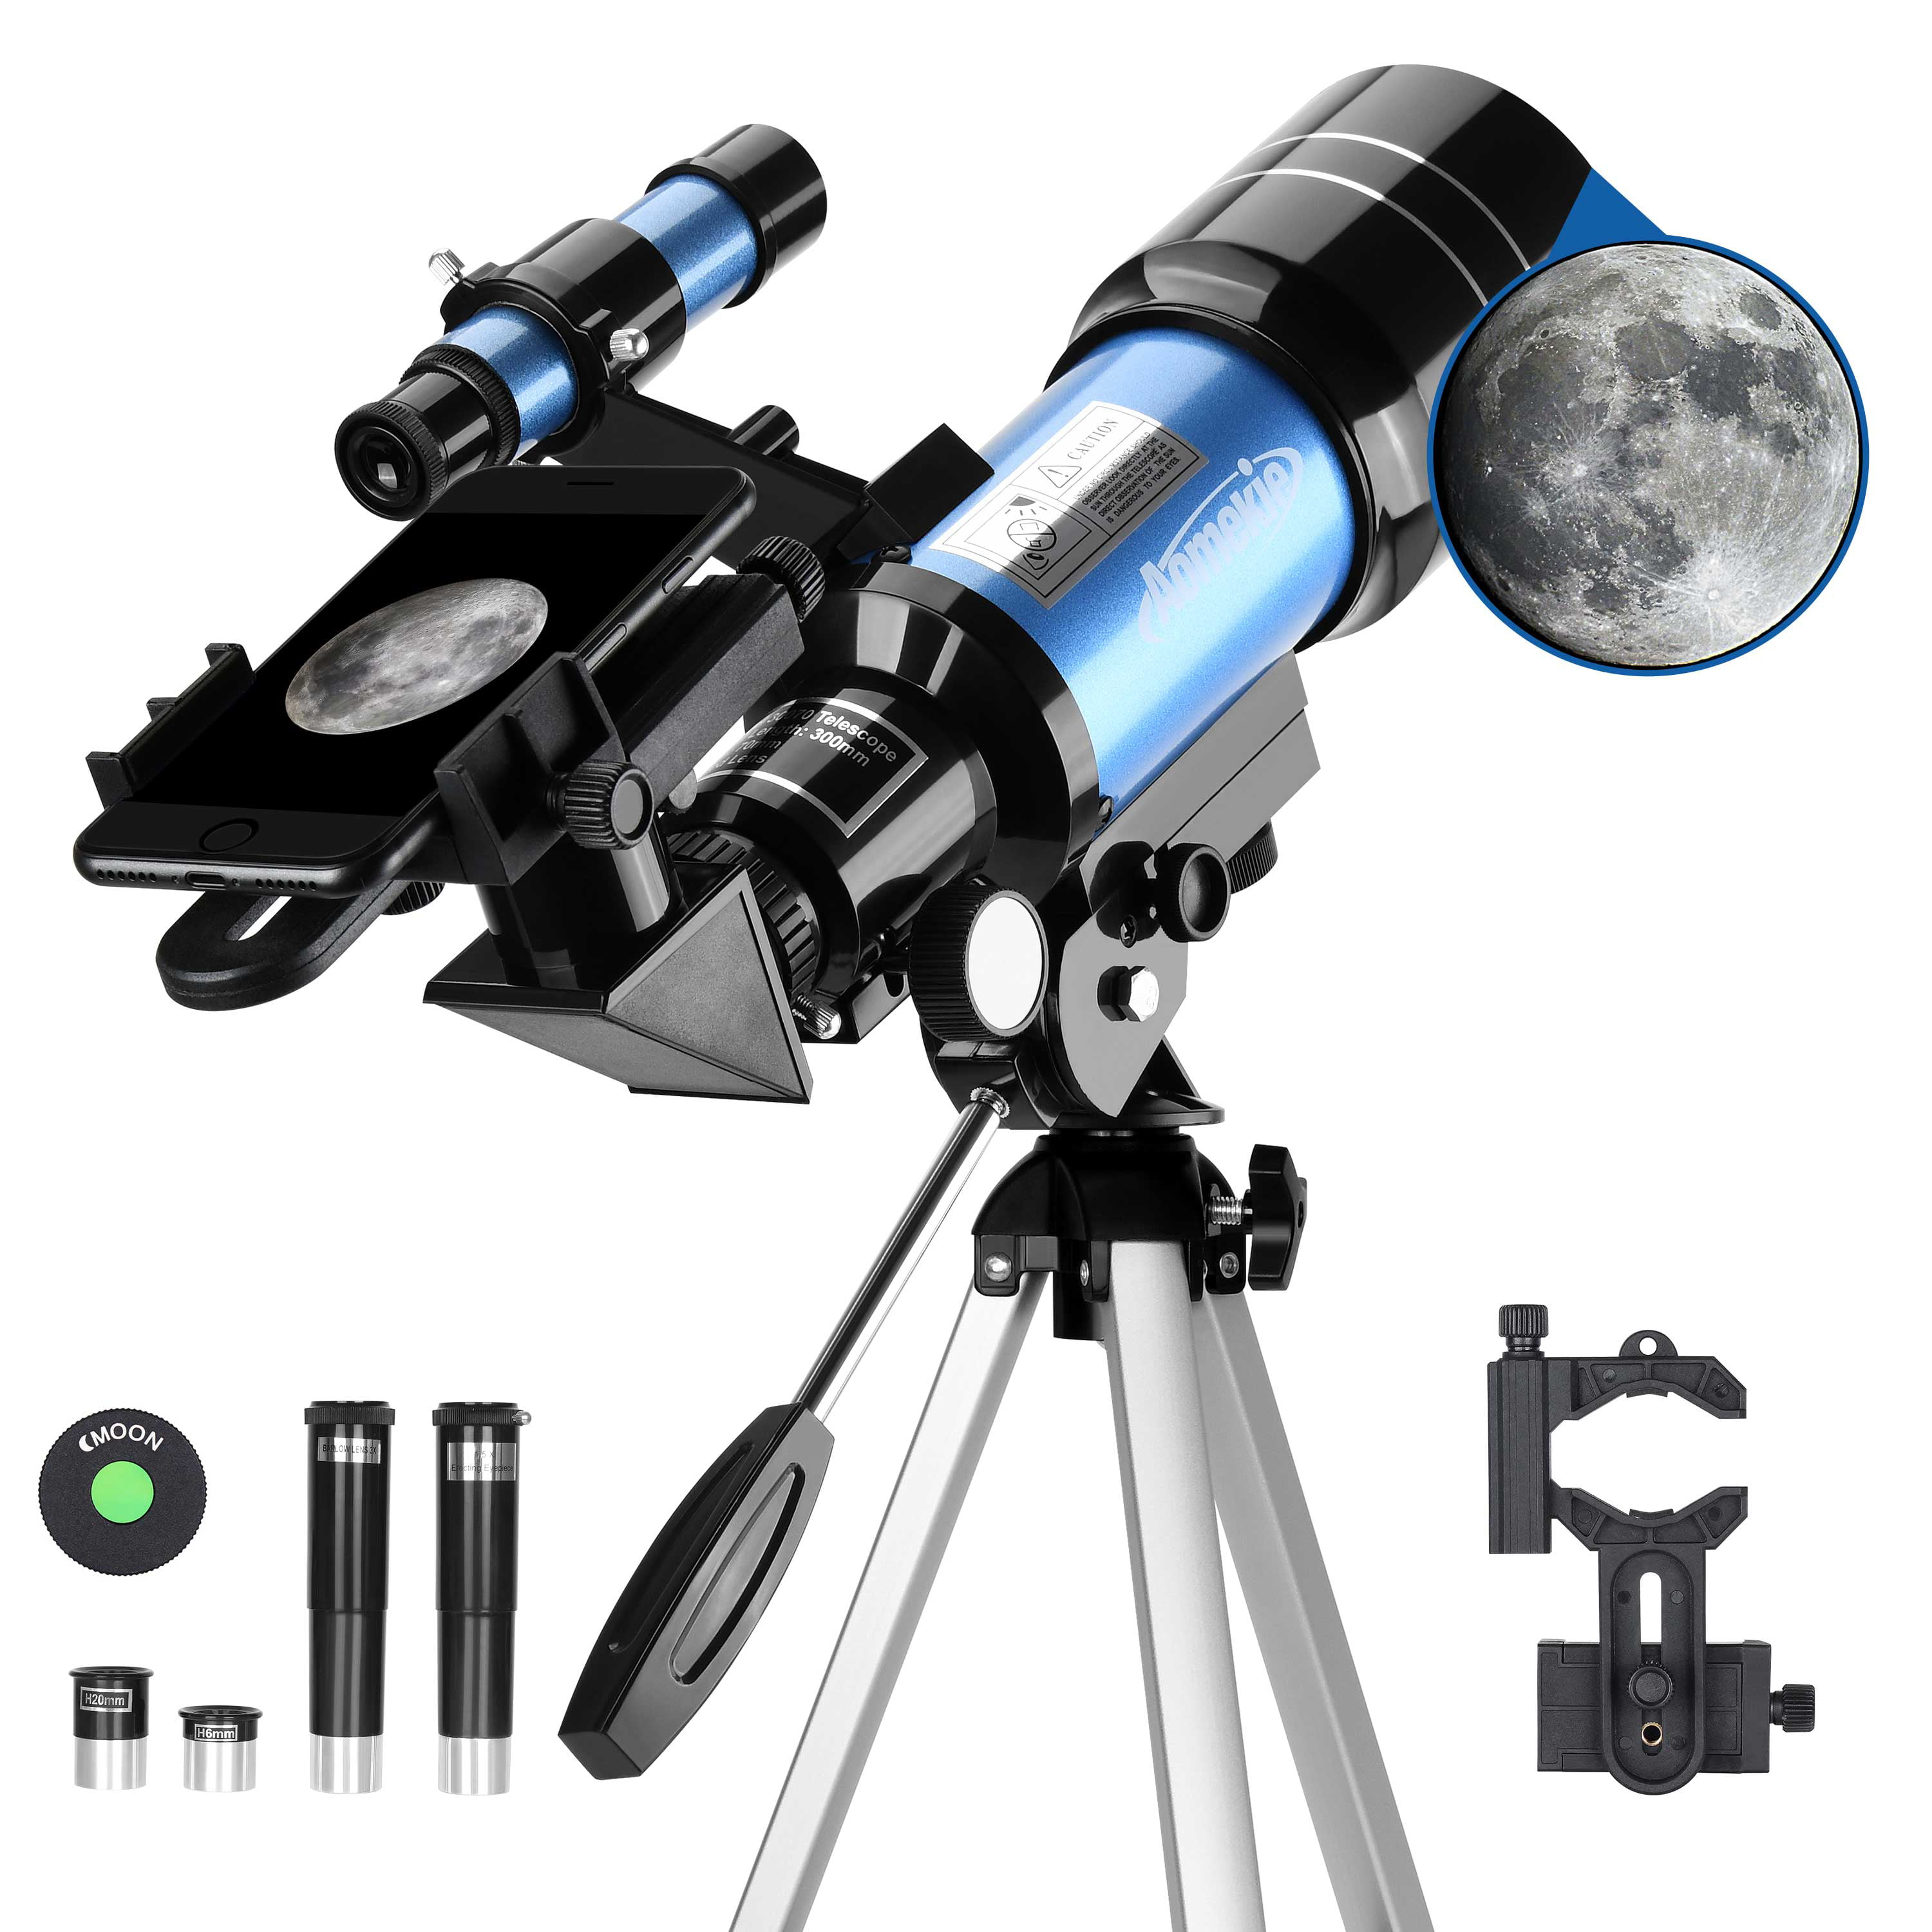 Kids Science Telescope Educational Learning Toy for Sky Star Gazing & Birds Watching Kids Telescopes Manfore 90X Science Astronomical Telescope with Tripod and 2 Magnification Eyepieces 